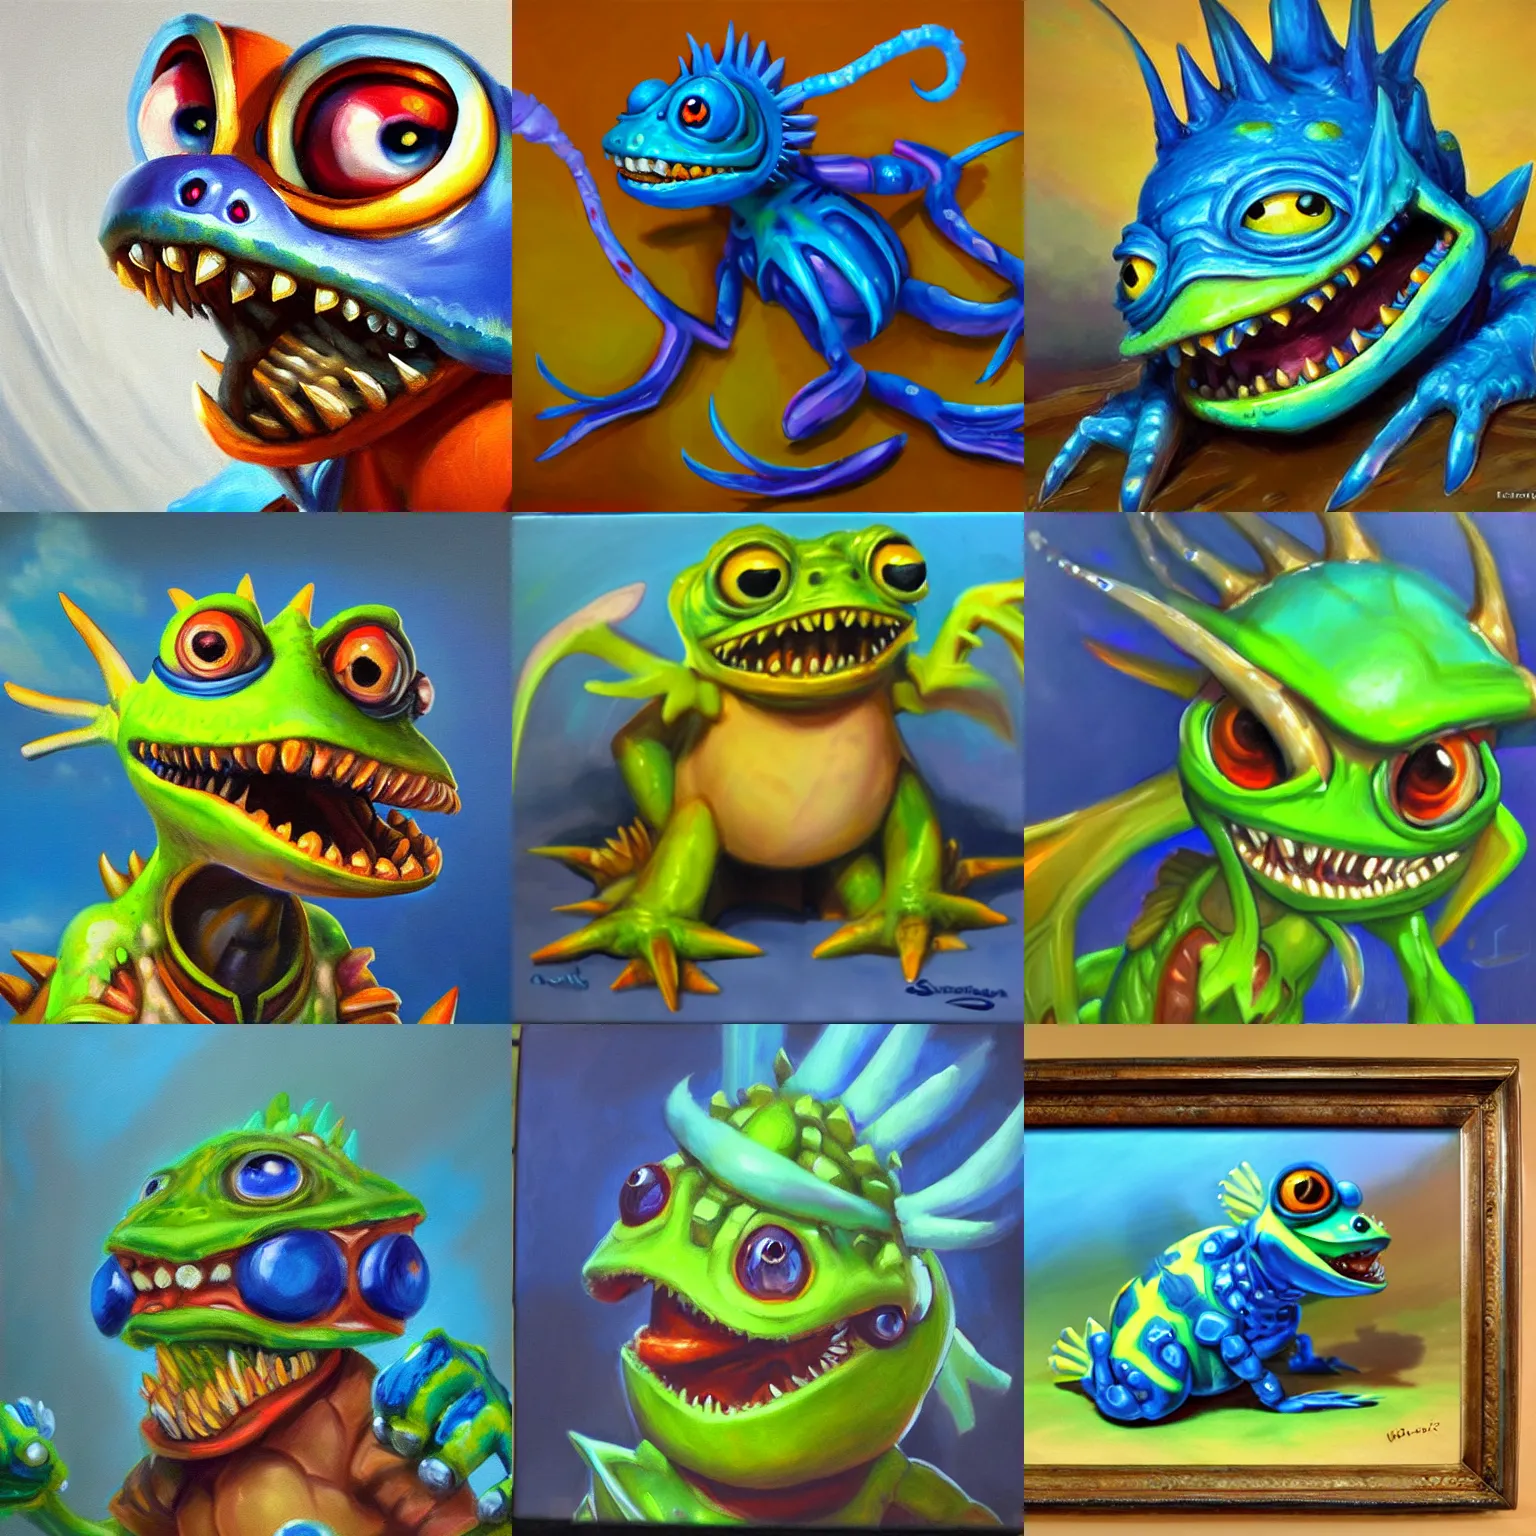 Prompt: An oil painting of a Murloc from World of Warcraft